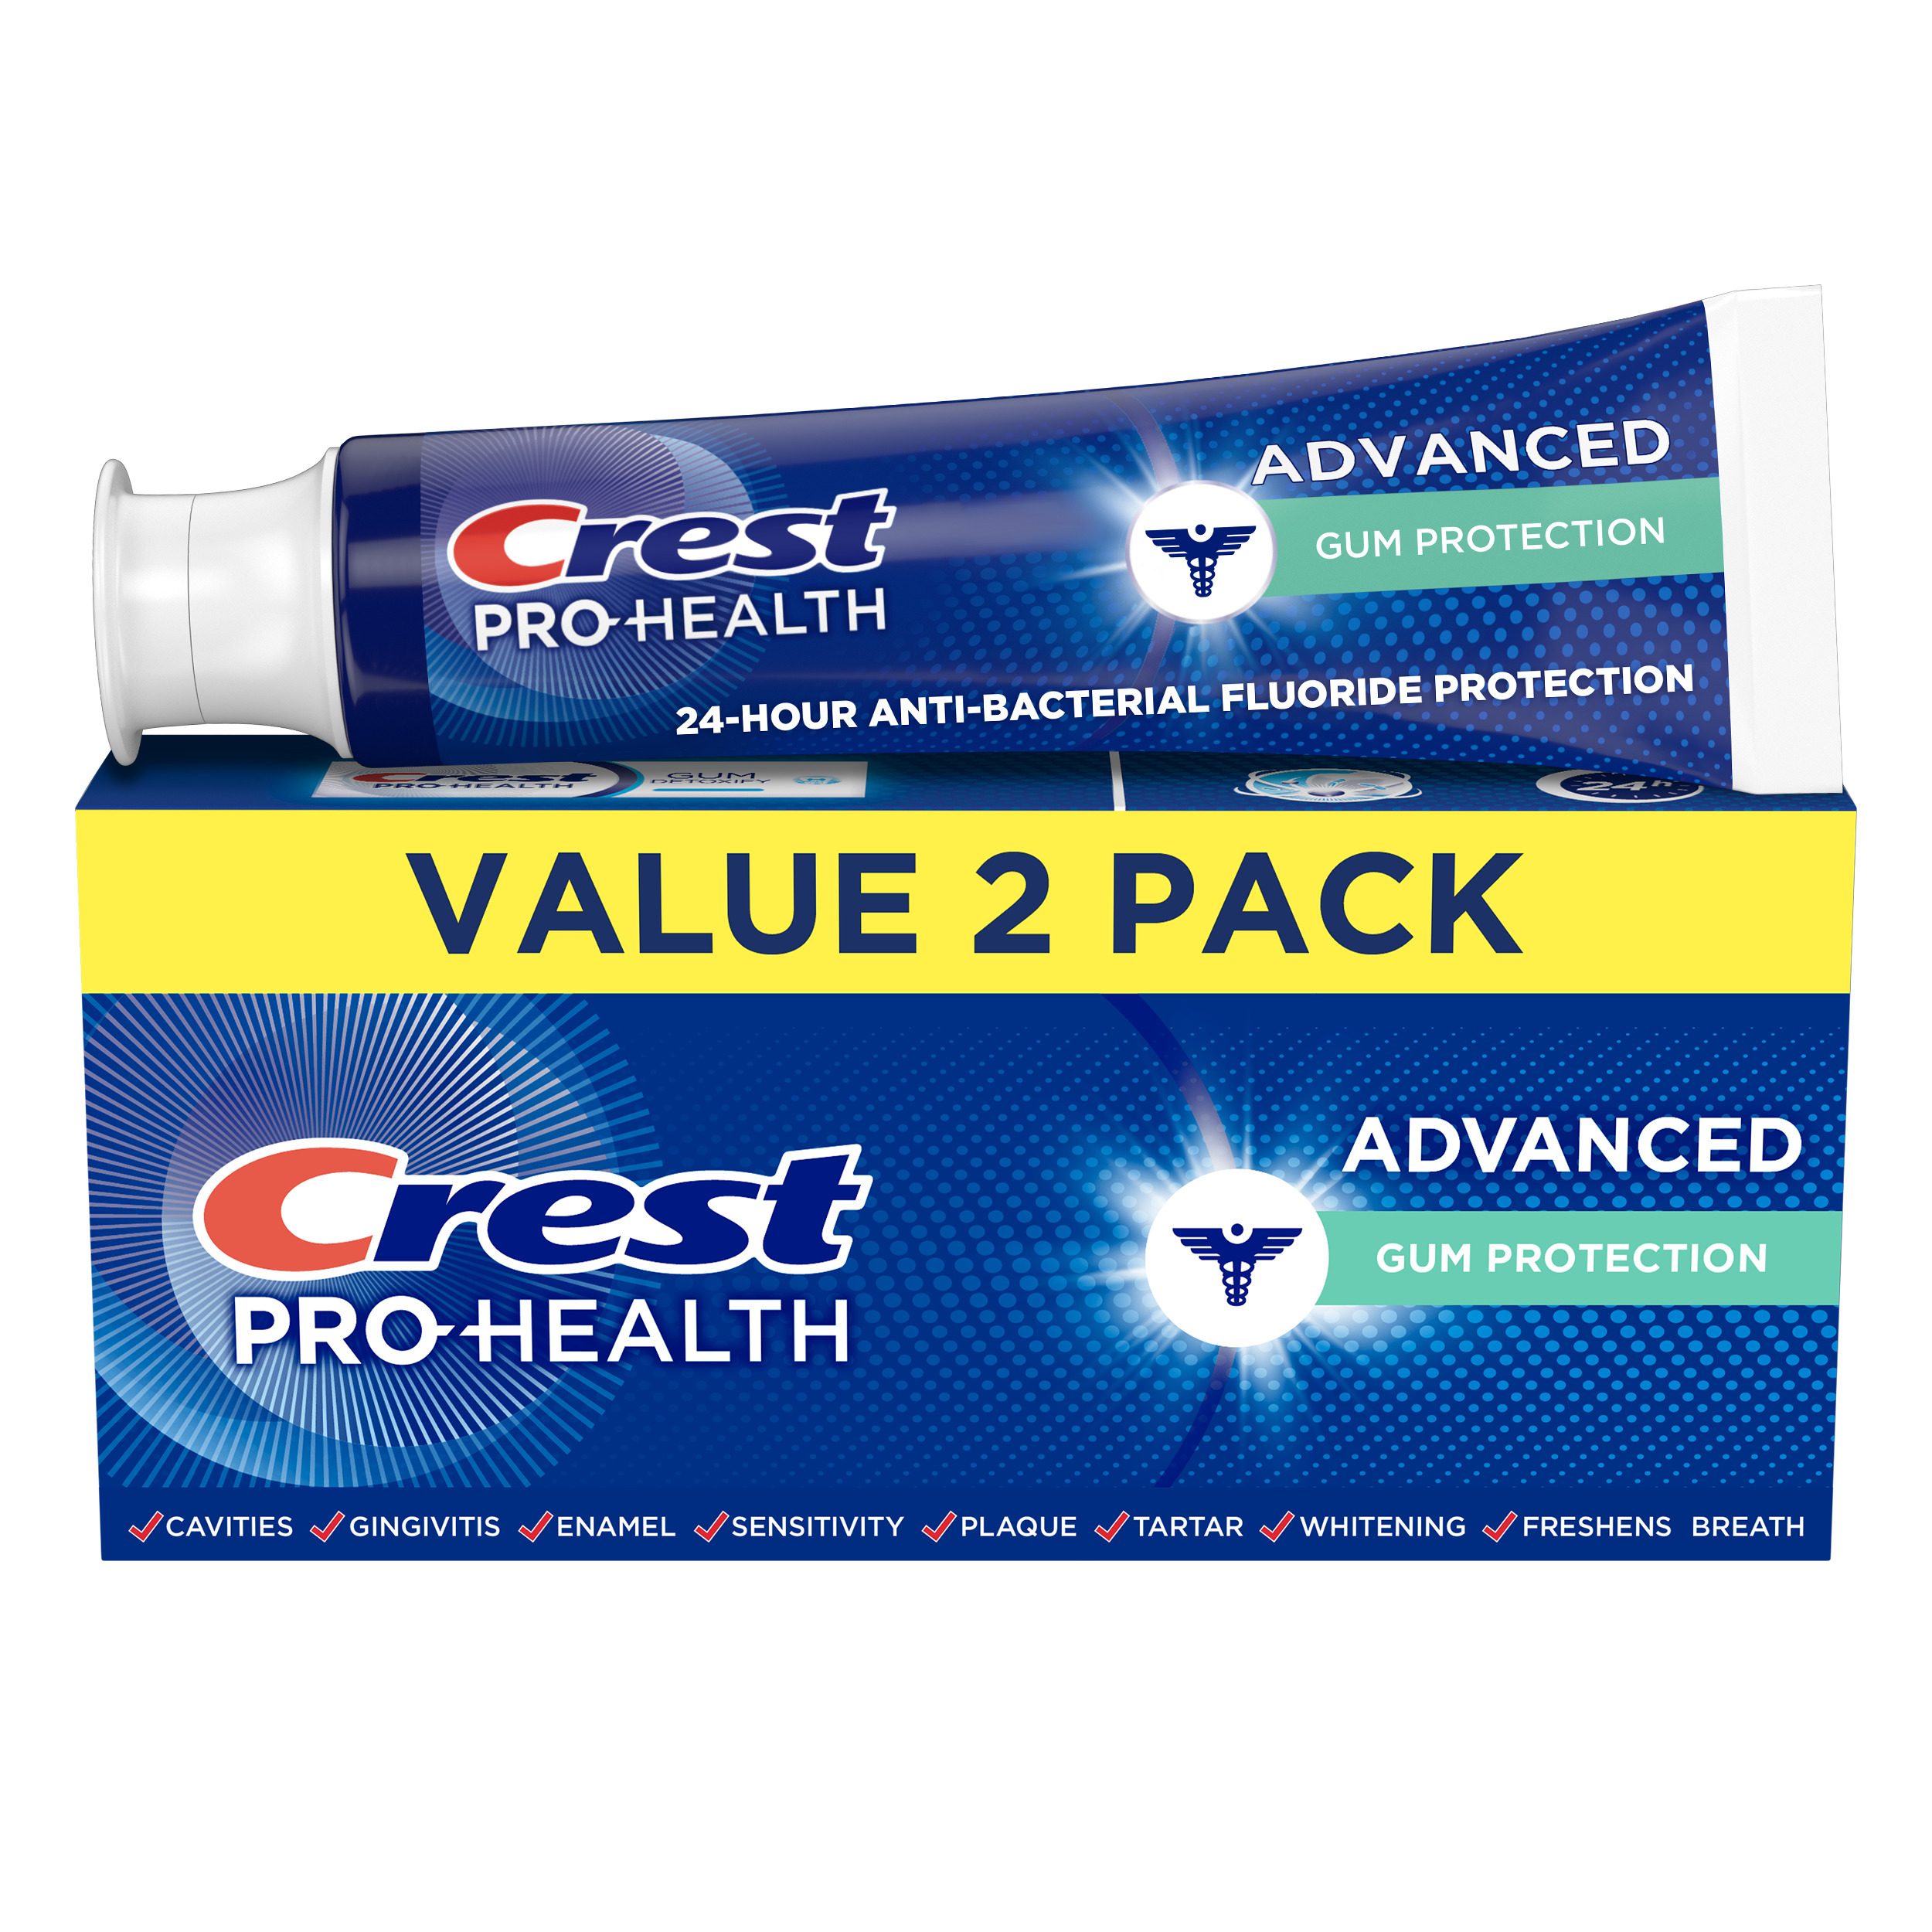 Crest Pro-Health Advanced Gum Protection Toothpaste (5.1oz), 2 Count - image 1 of 6